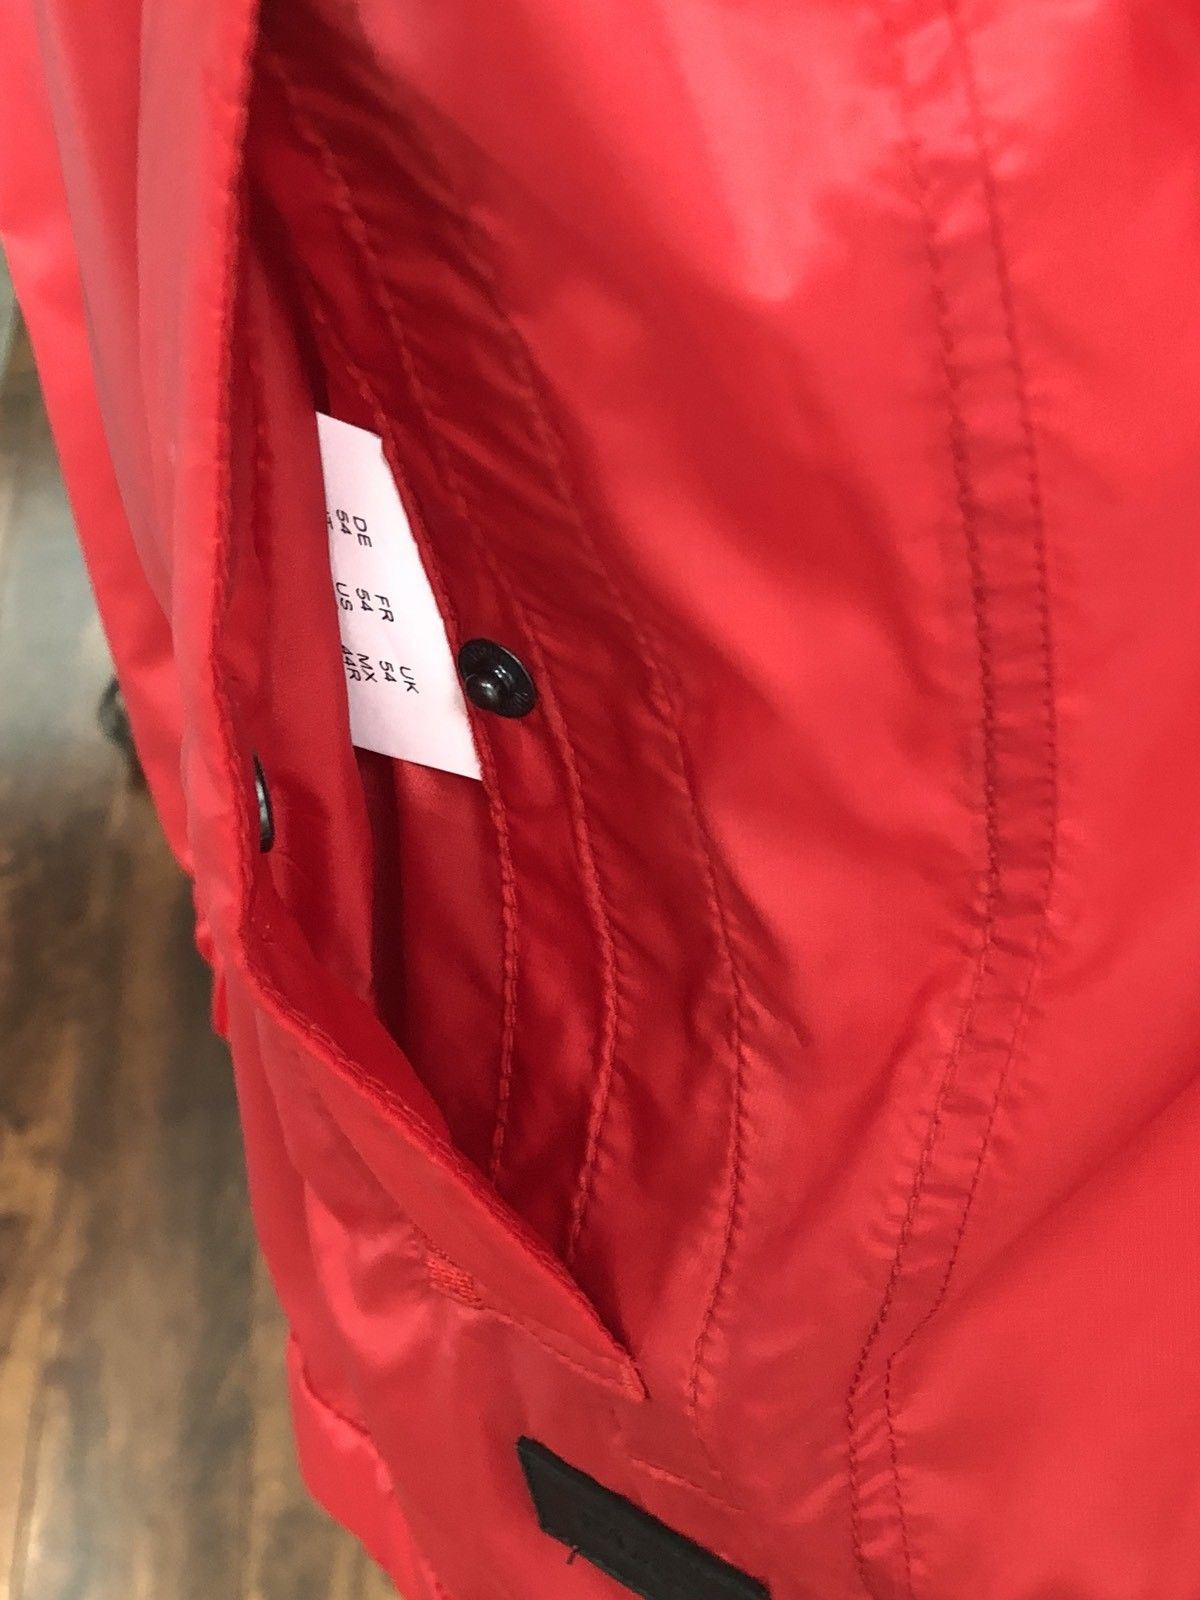 NWT $395 Boss Hugo Boss Black Label Collins Rain Jacket Bright Red Size 44R US - BAYSUPERSTORE